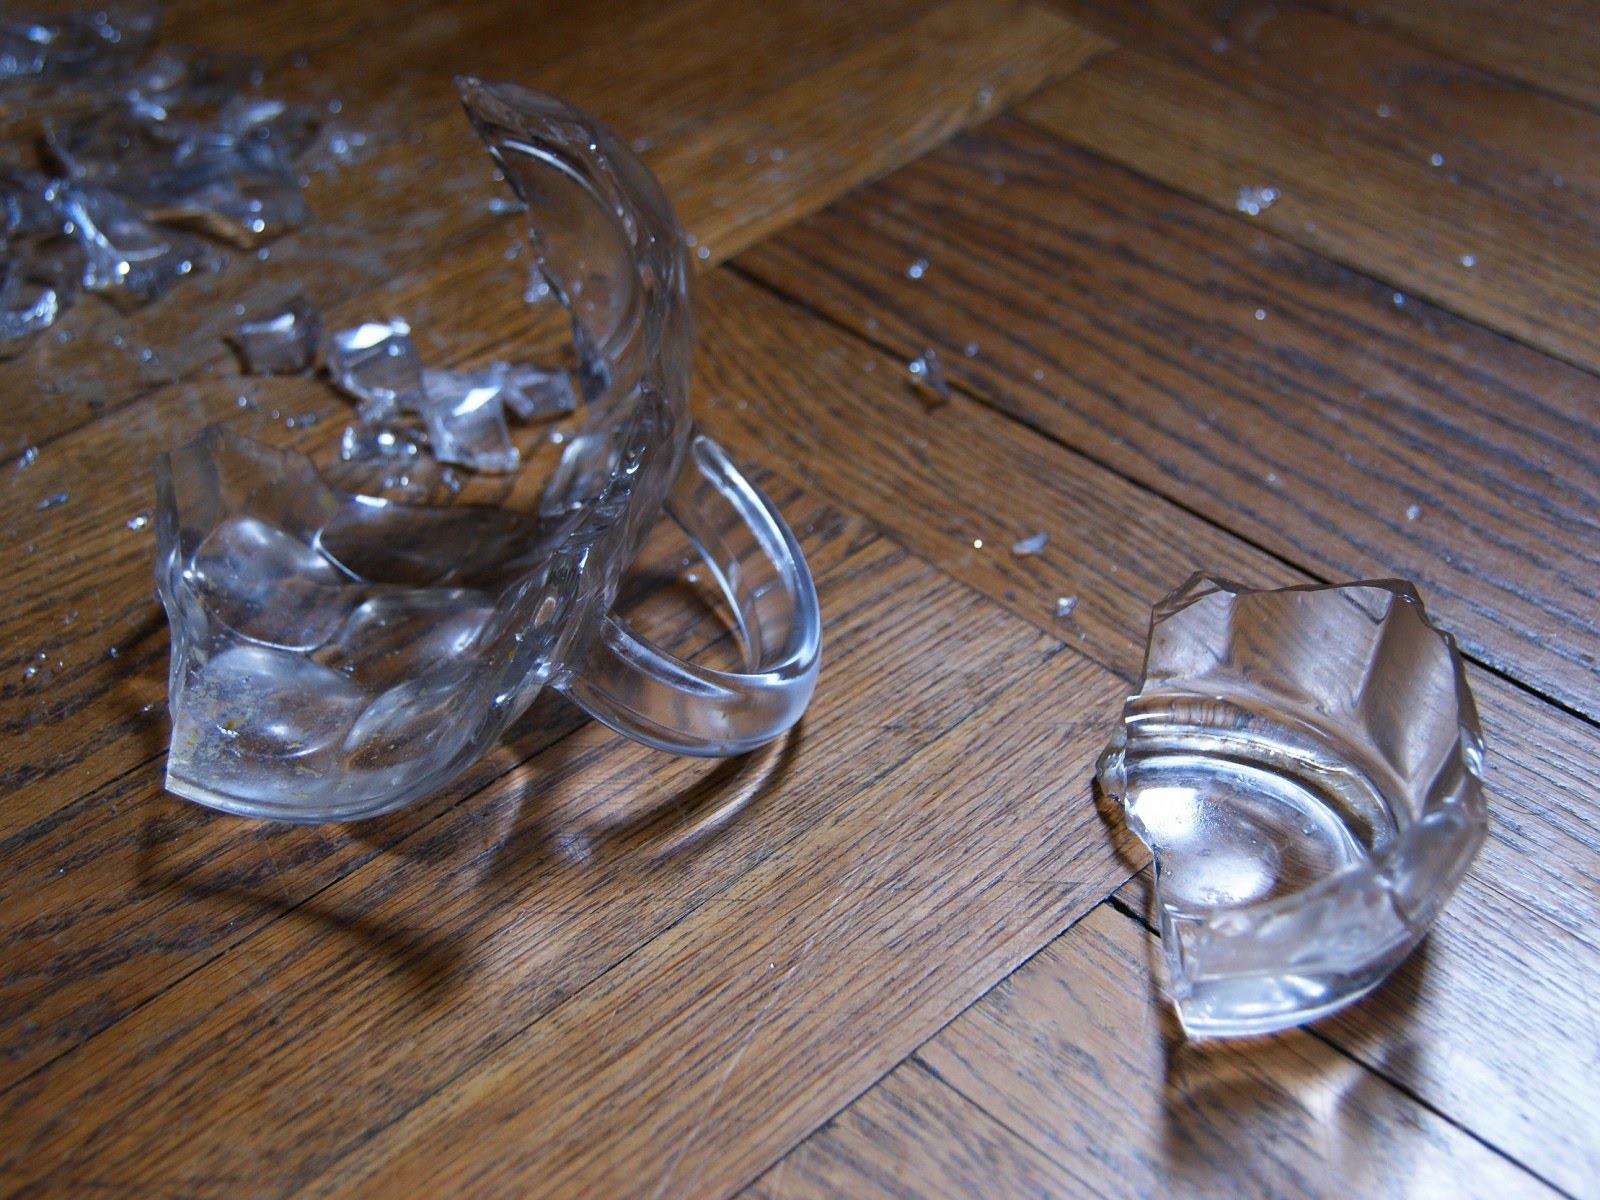 How To Clean Up Broken Glass